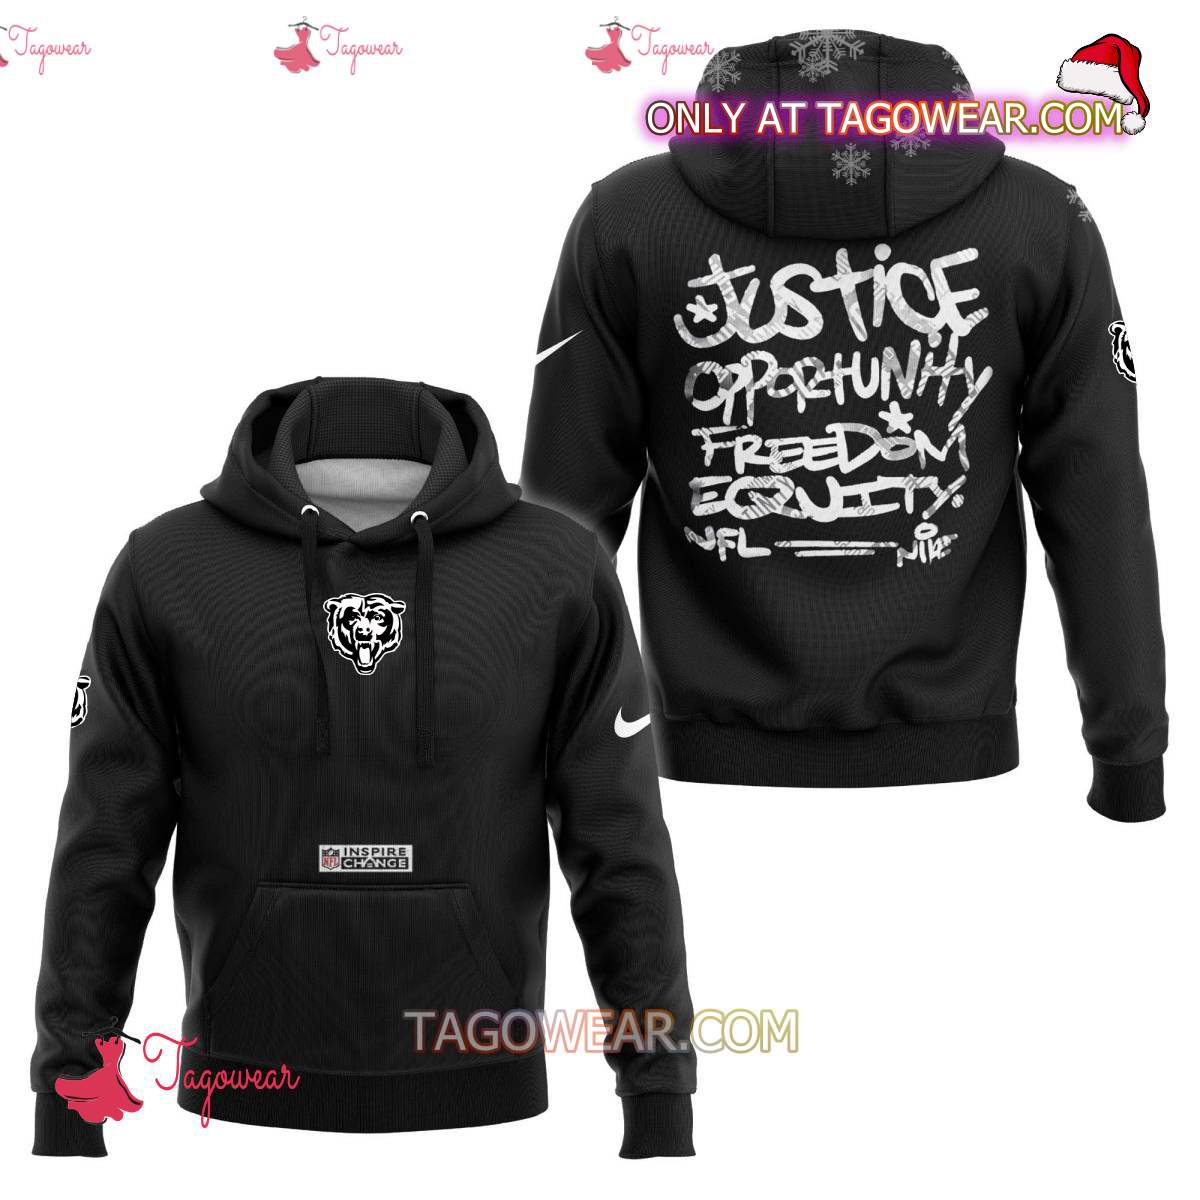 Chicago Bears NFL Inspire Change Justice Opportunity Equality Freedom Hoodie